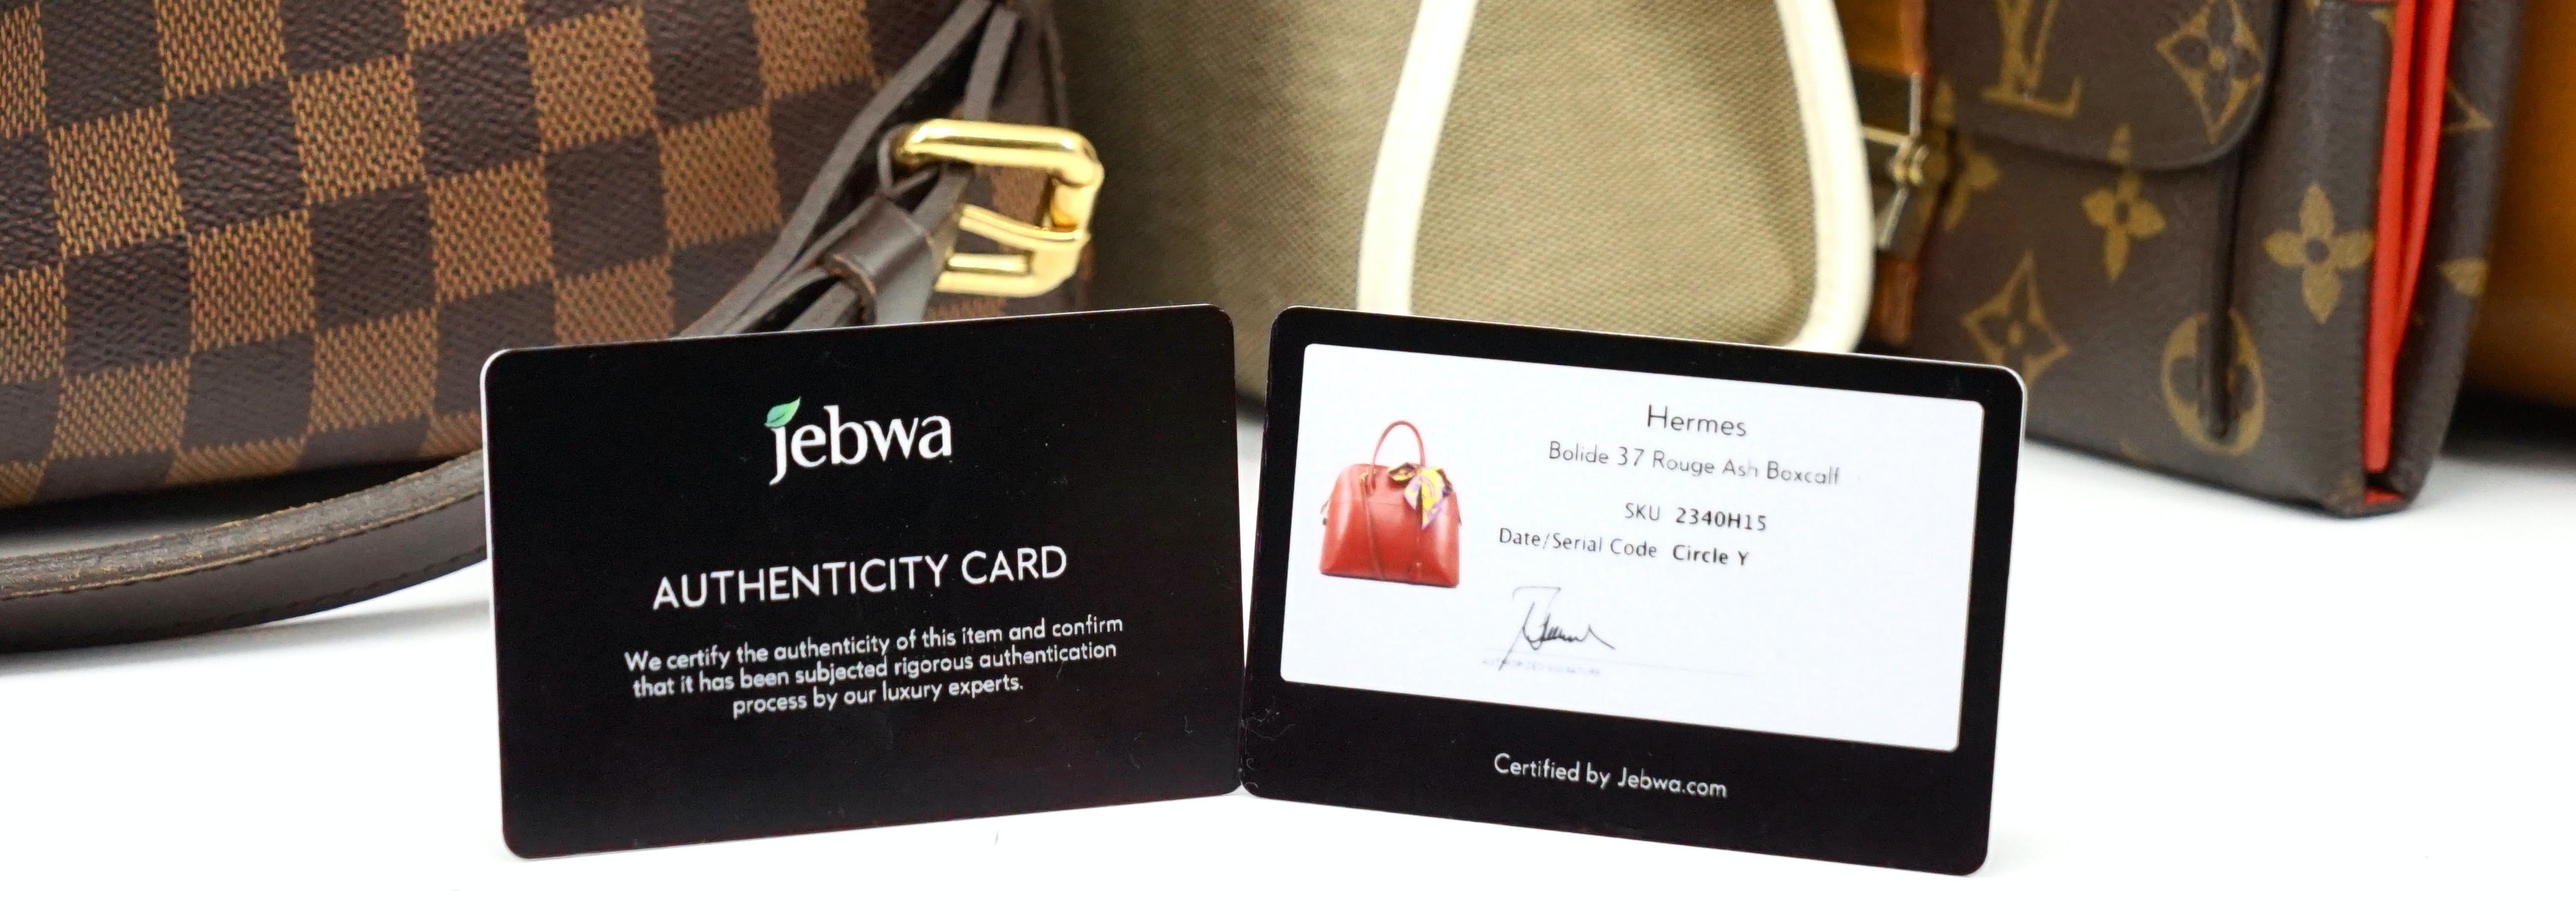 Assorted Luxury Brand Authenticity Card